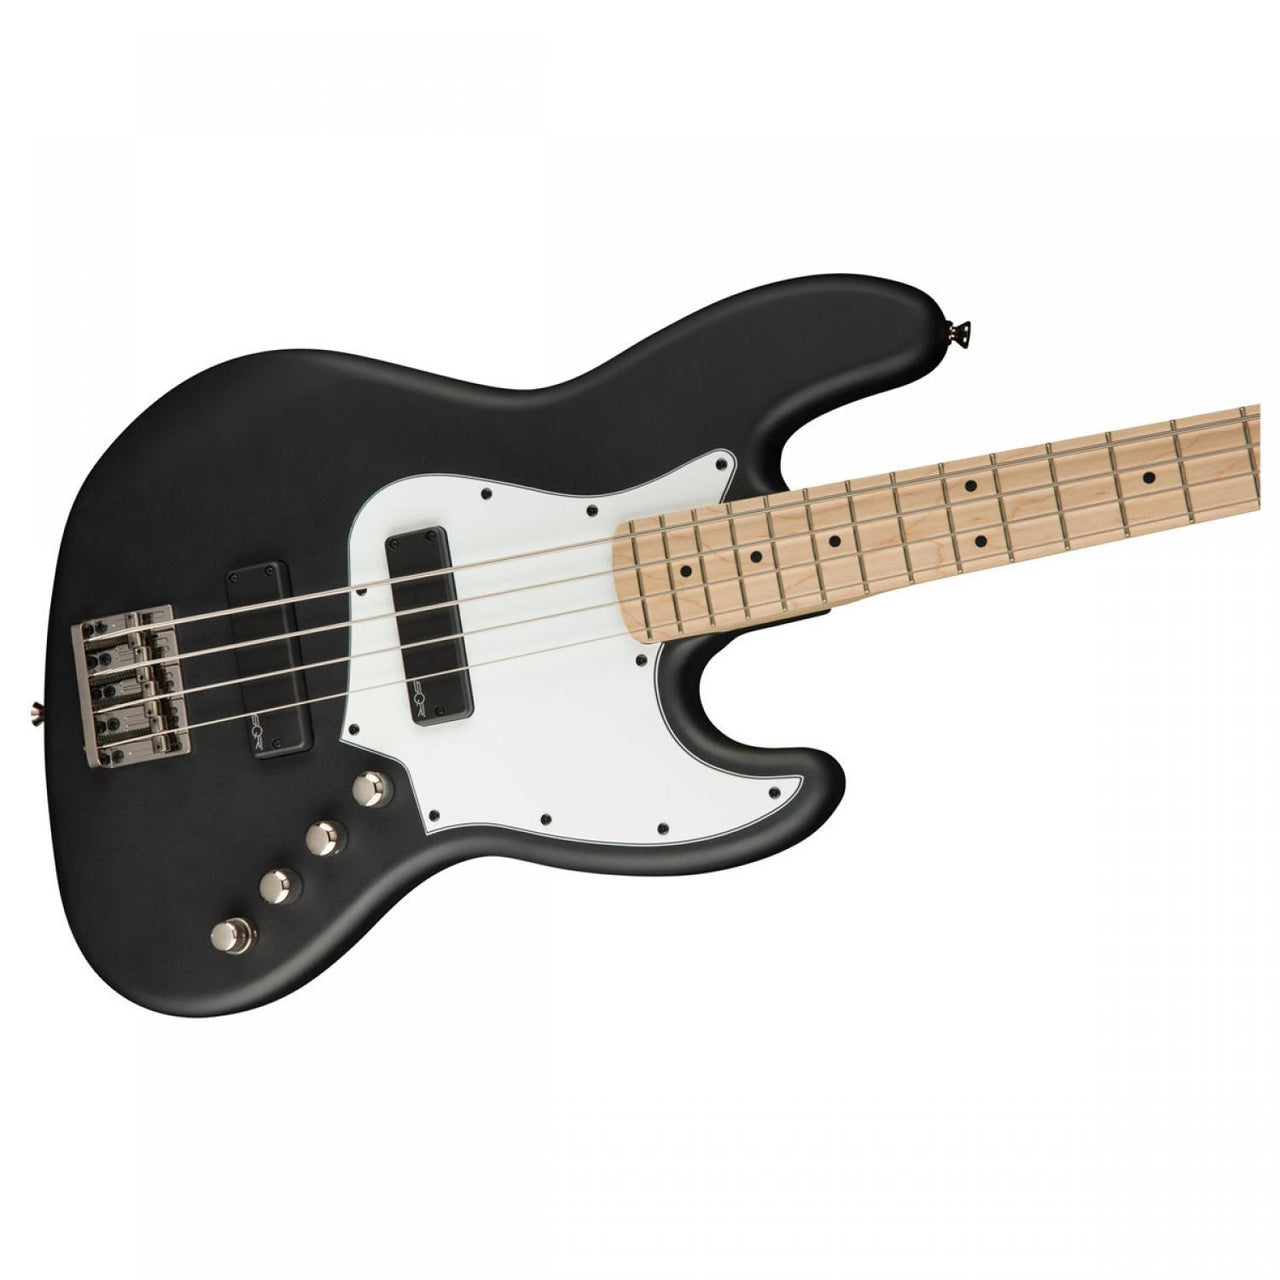 Bajo Electrico Fender Cont Act J Bass Hh Mn Flt Blk, 0370450510